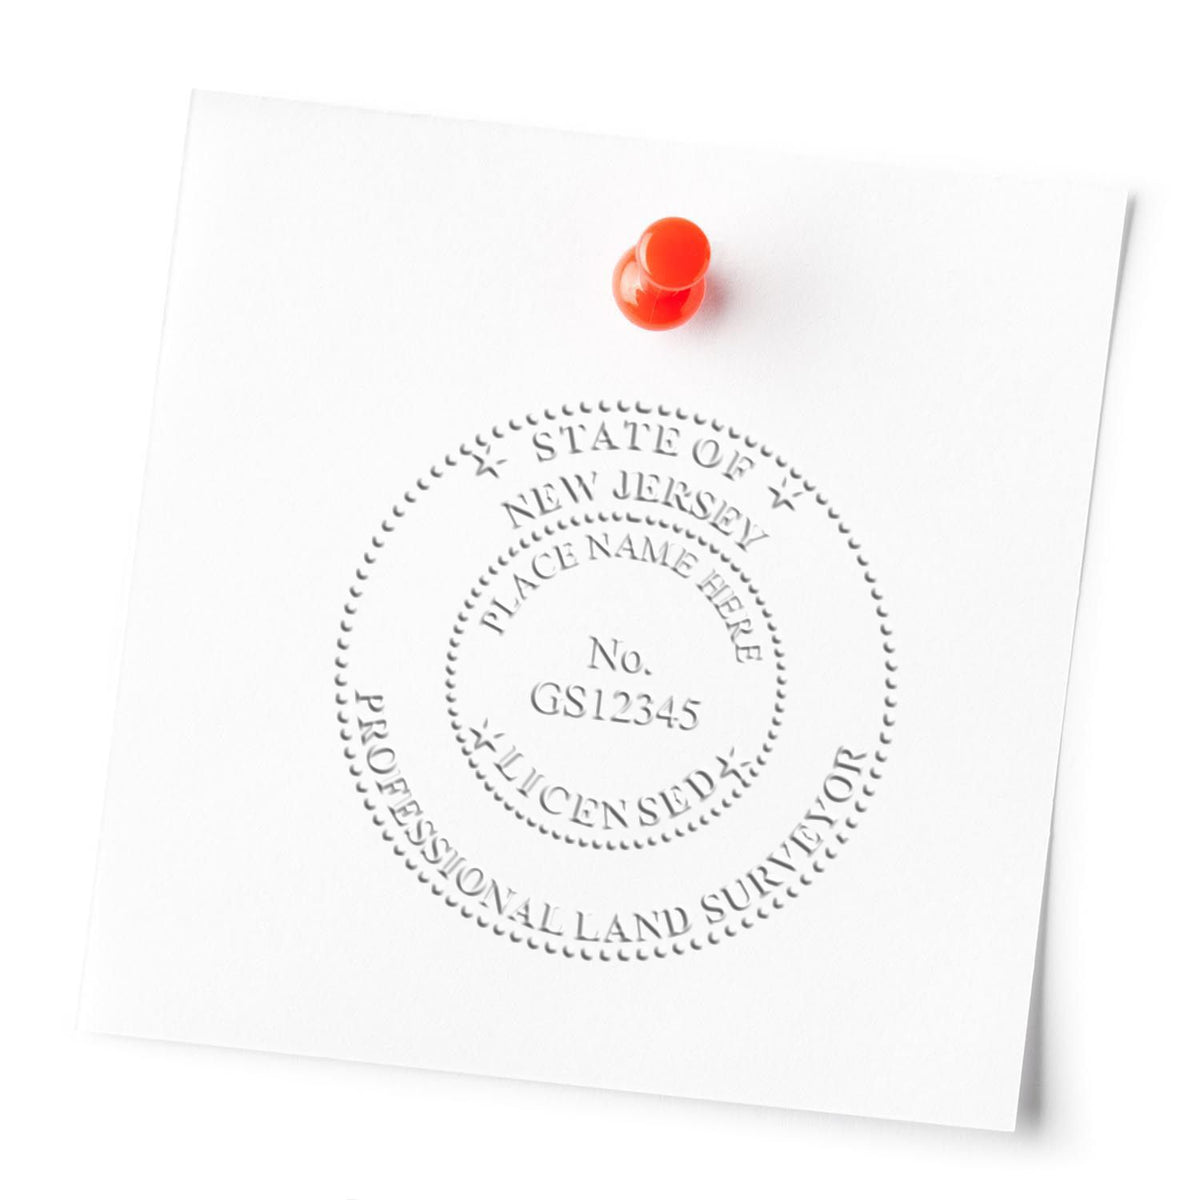 Another Example of a stamped impression of the State of New Jersey Soft Land Surveyor Embossing Seal on a piece of office paper.